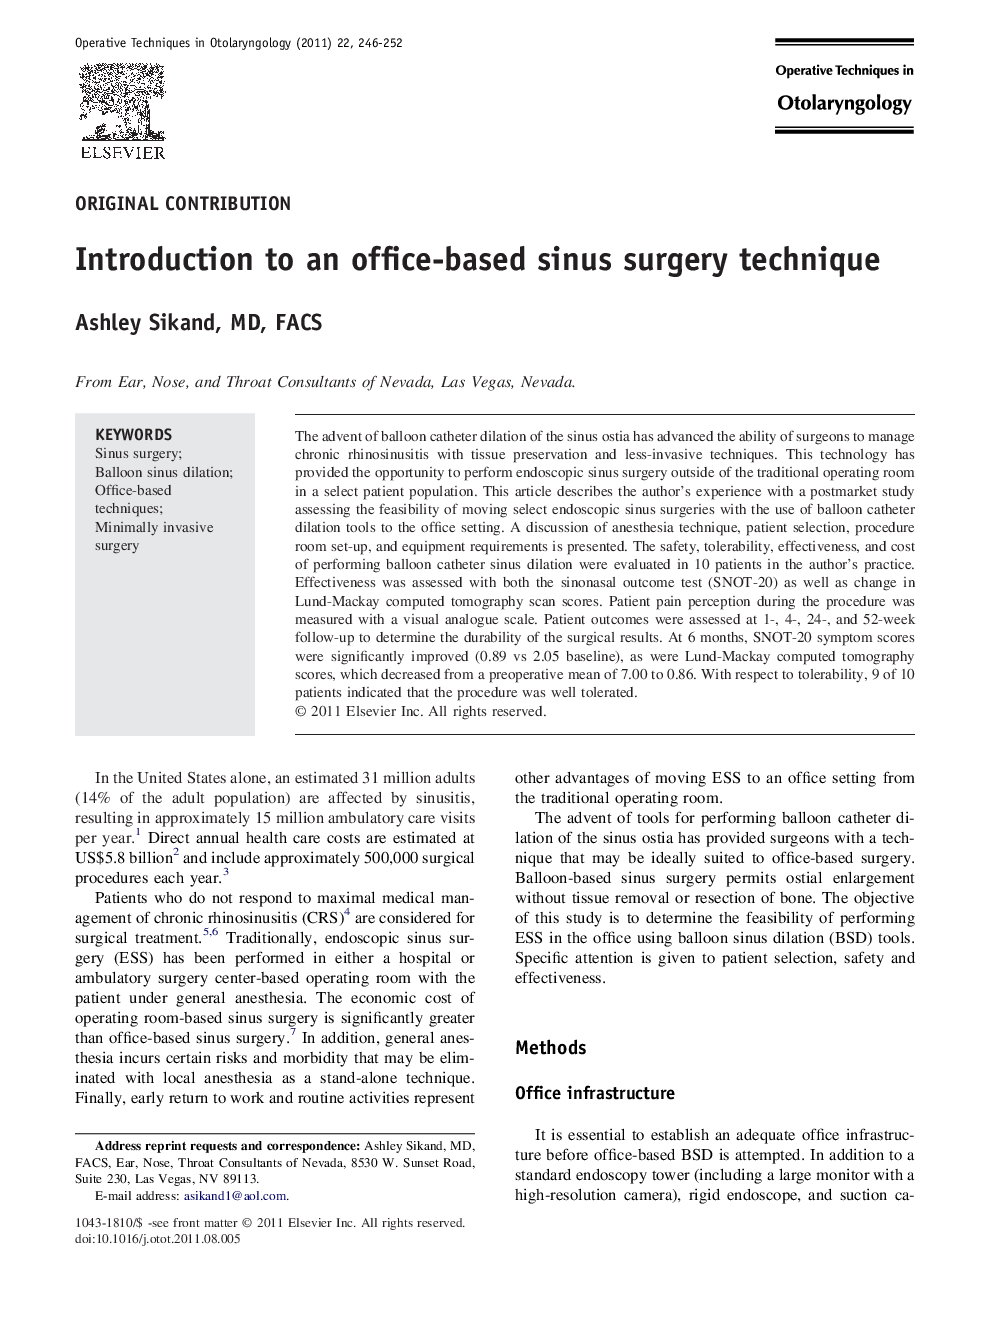 Introduction to an office-based sinus surgery technique